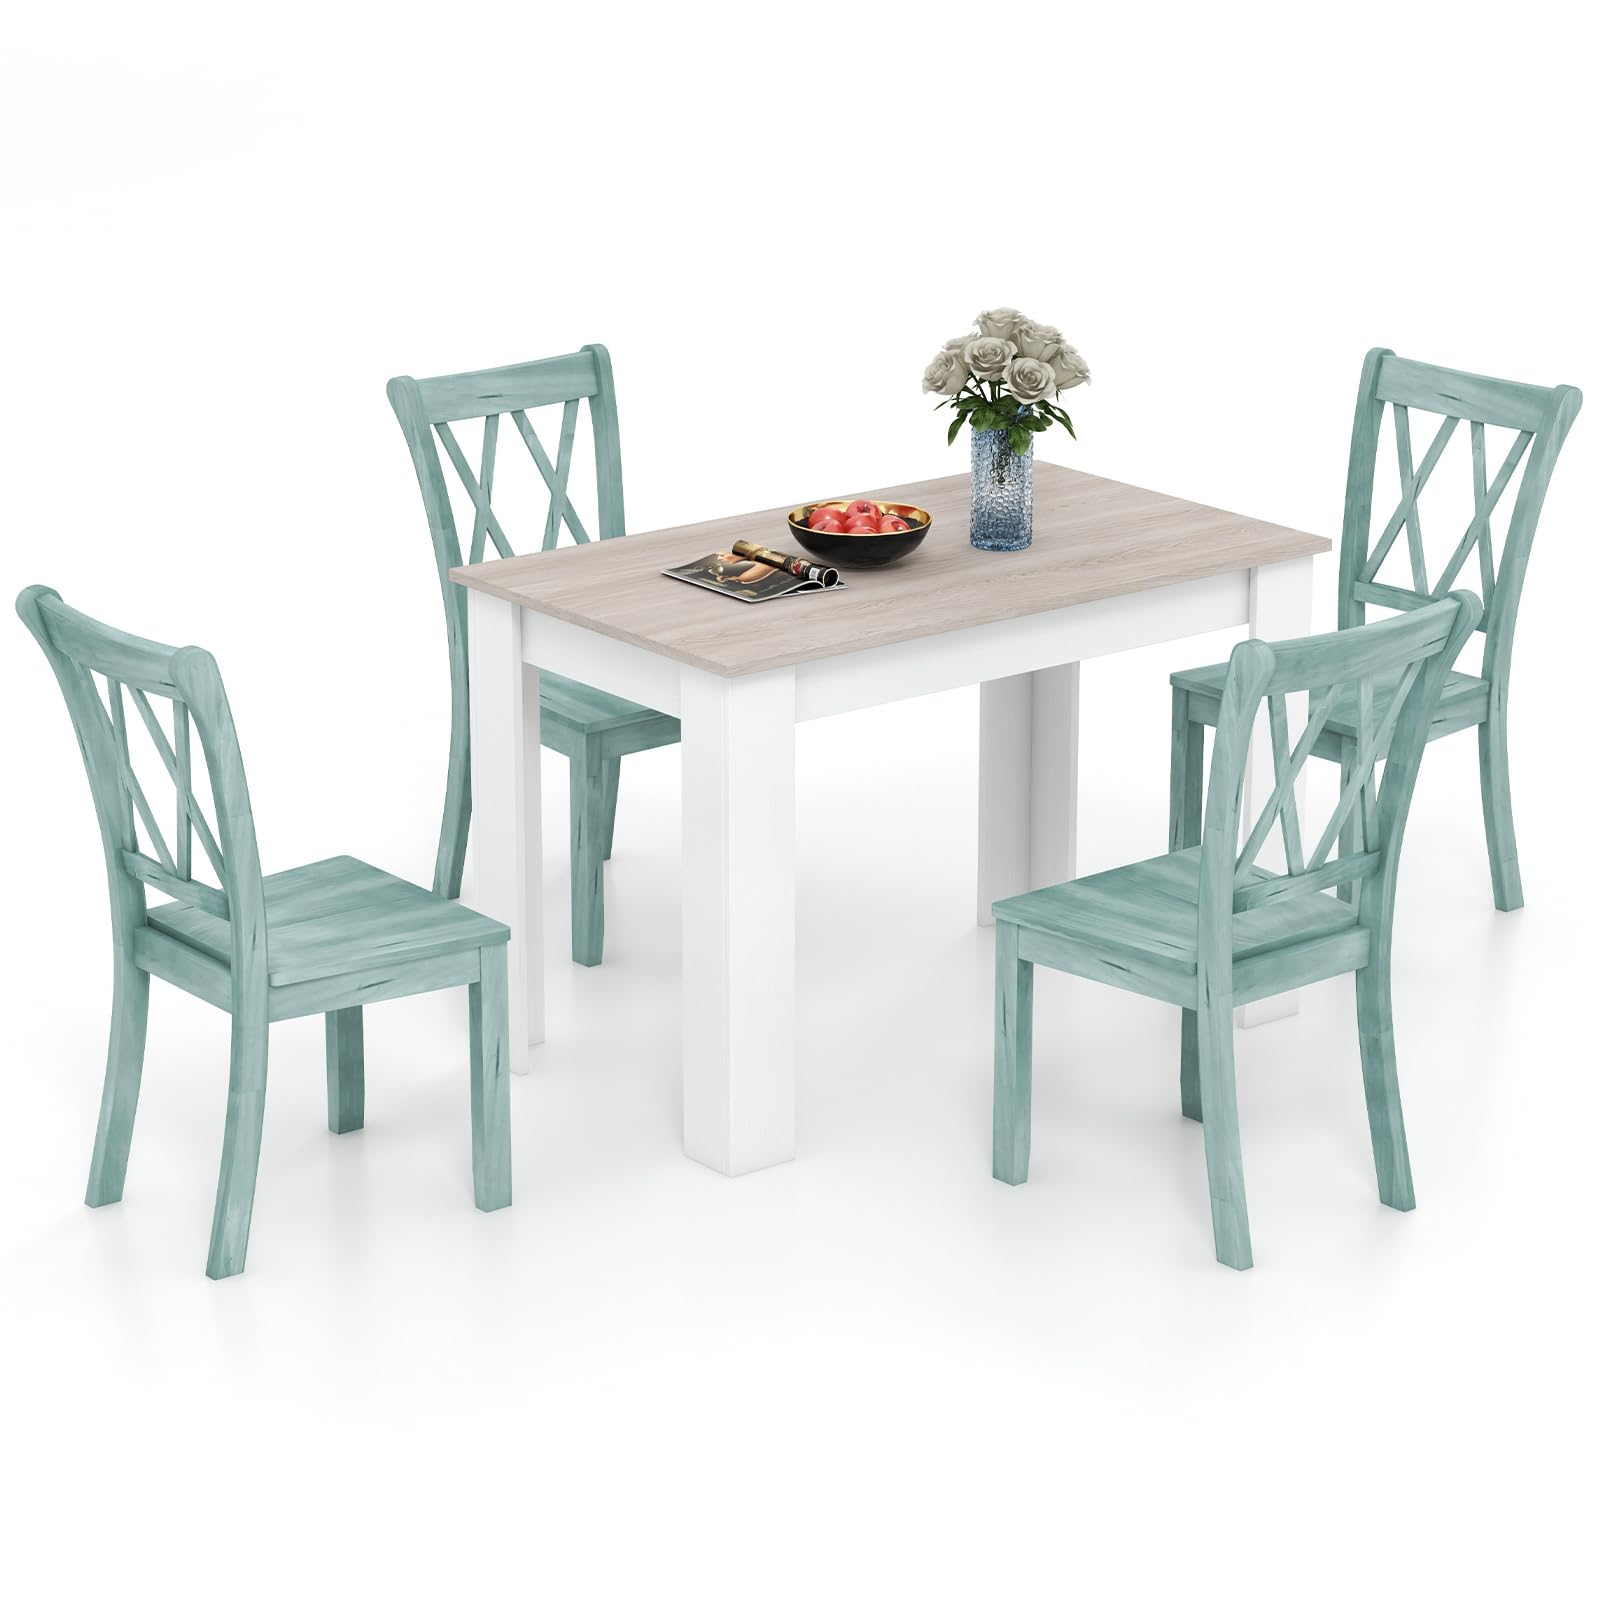 Giantex 5-Piece Dining Table Set, Modern Rectangle Dining Table & High Back Chairs Set for 4